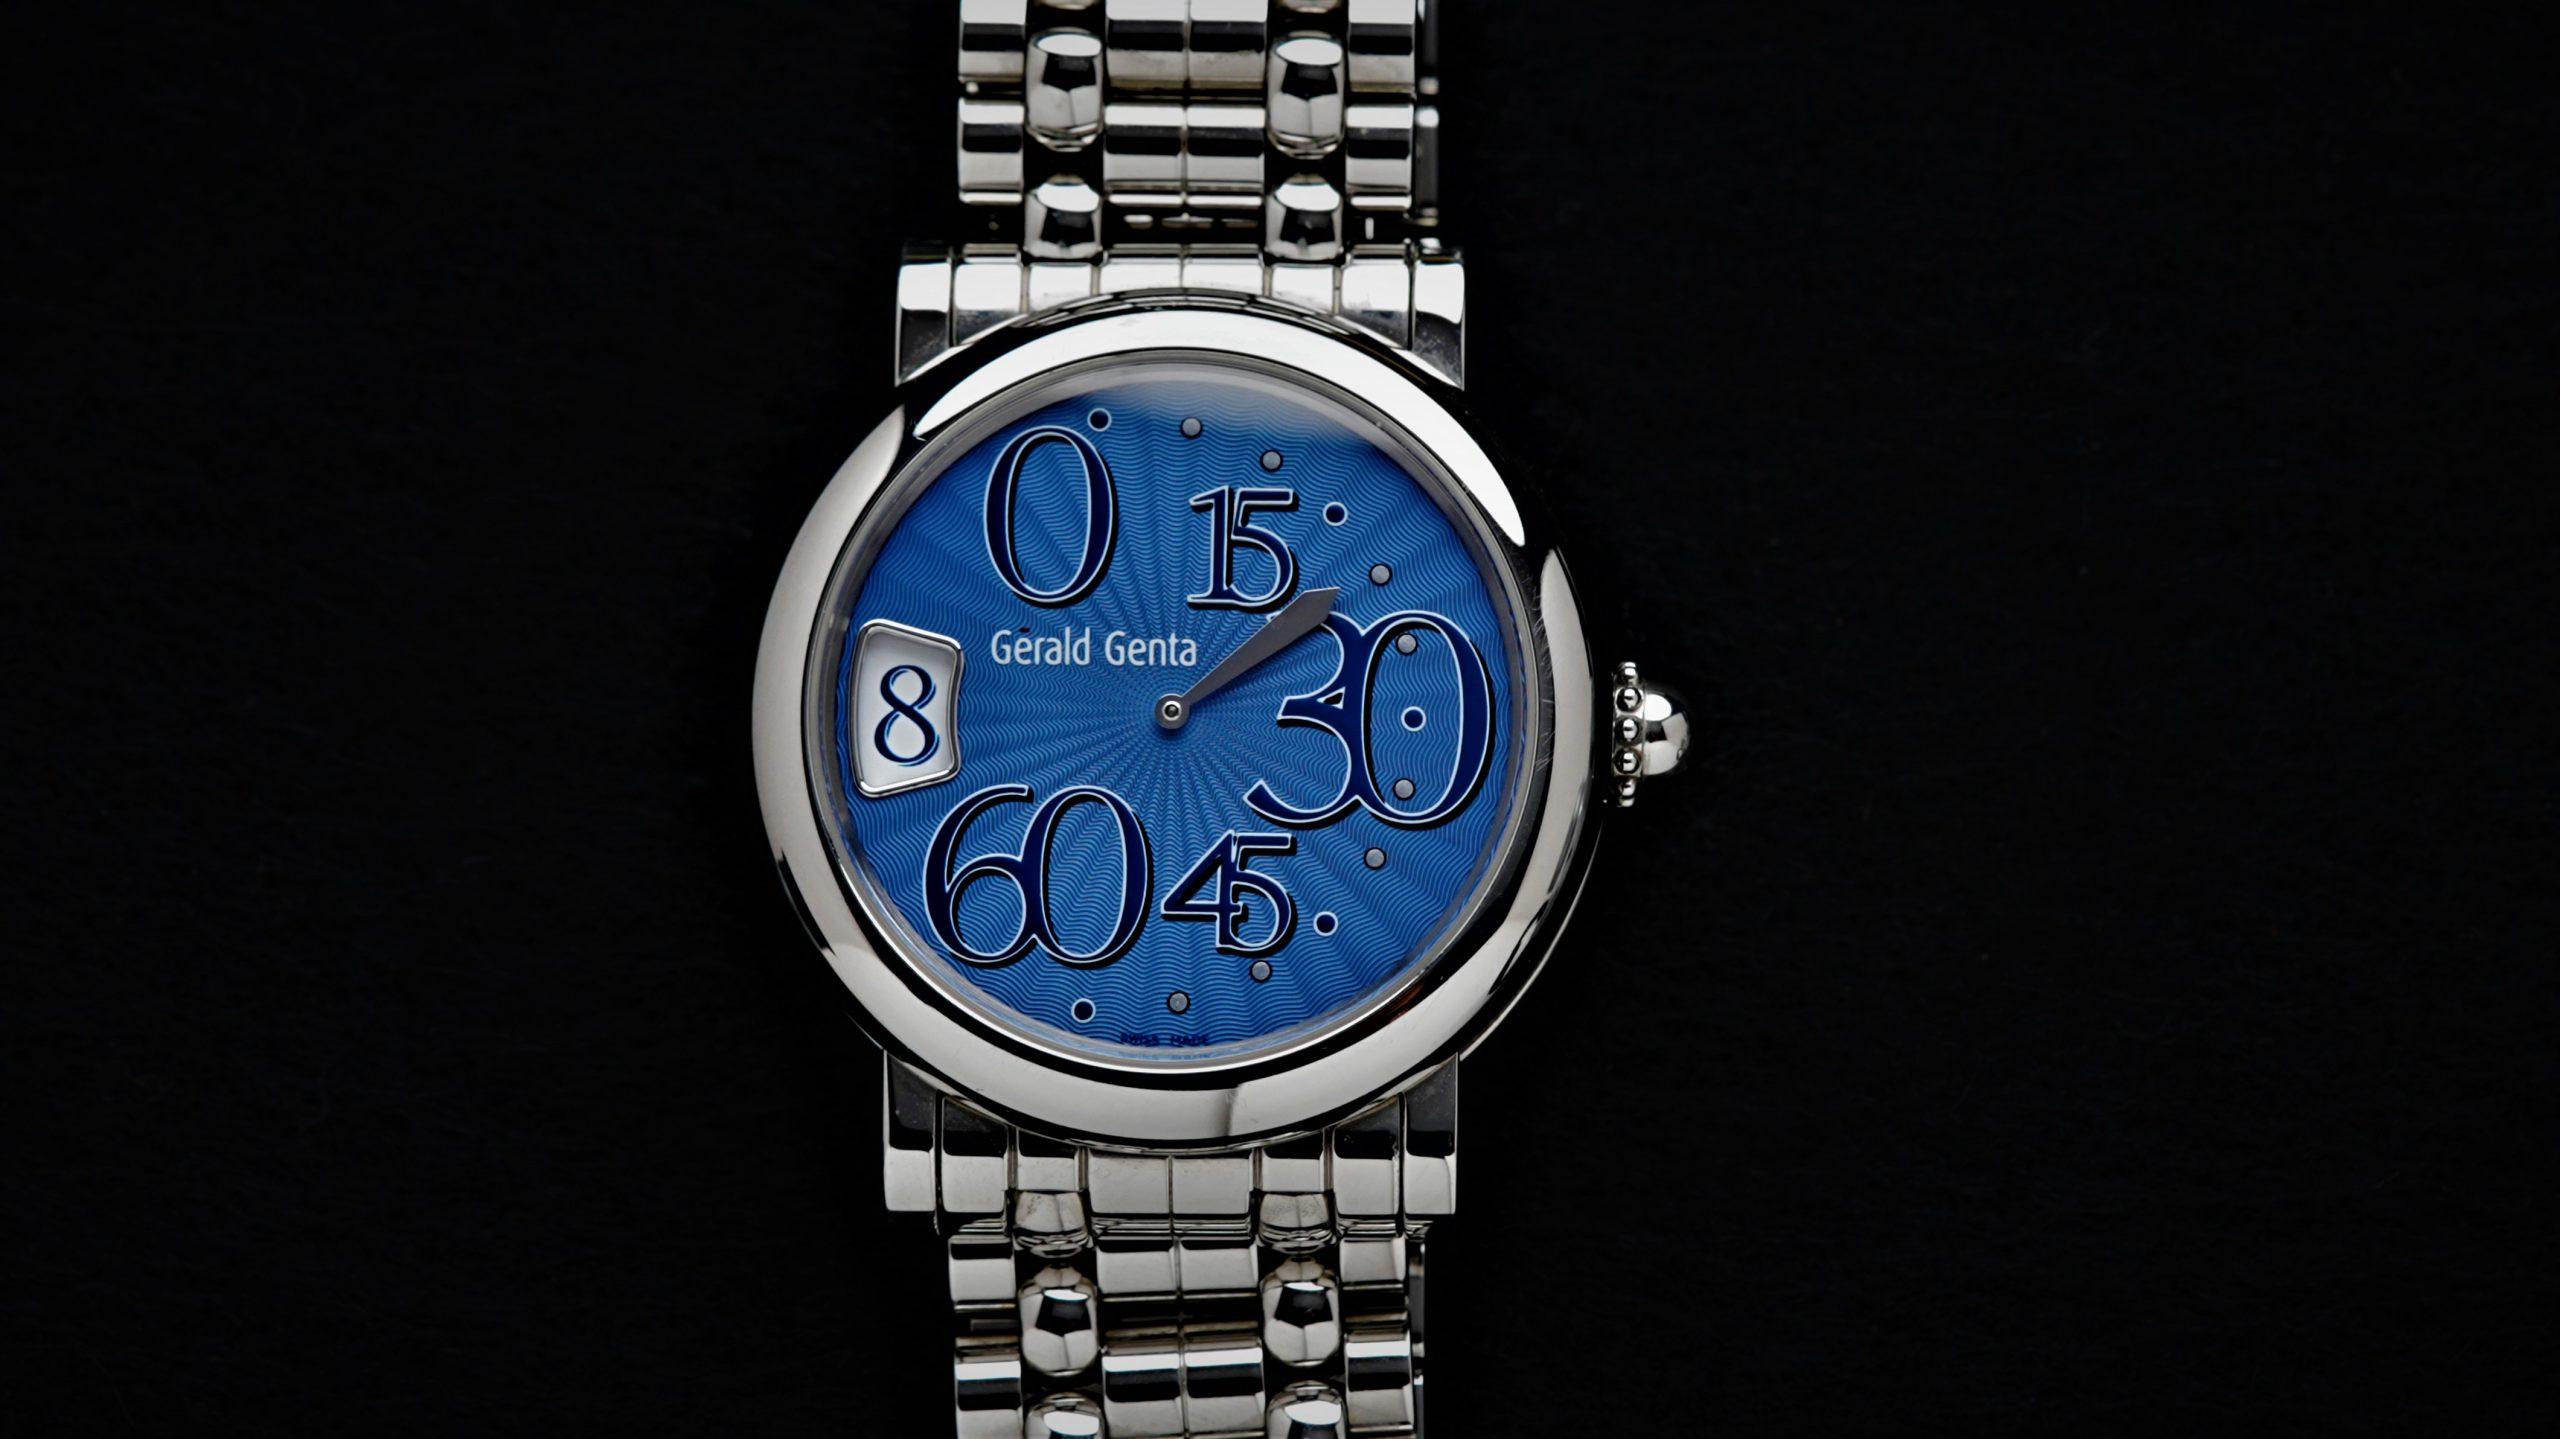 Gérald Genta Retro Classic Extremely Rare Blue Guilloche Dial Jump Hour watch under white lighting.